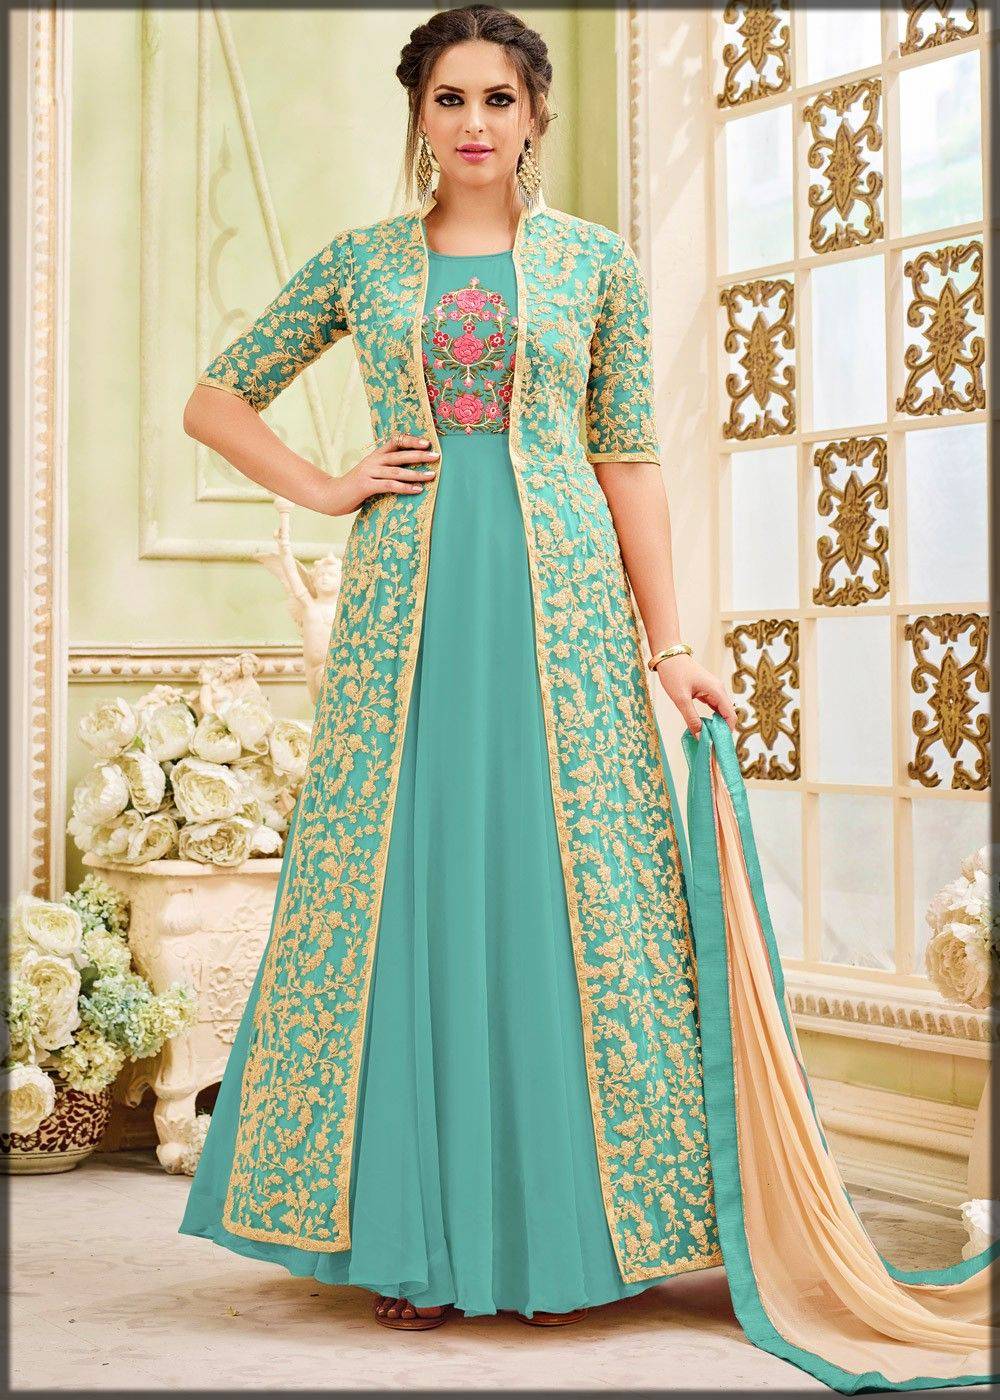 Stitched Full Length Psynatex Cotton Long Kurtis Gown With Jackets